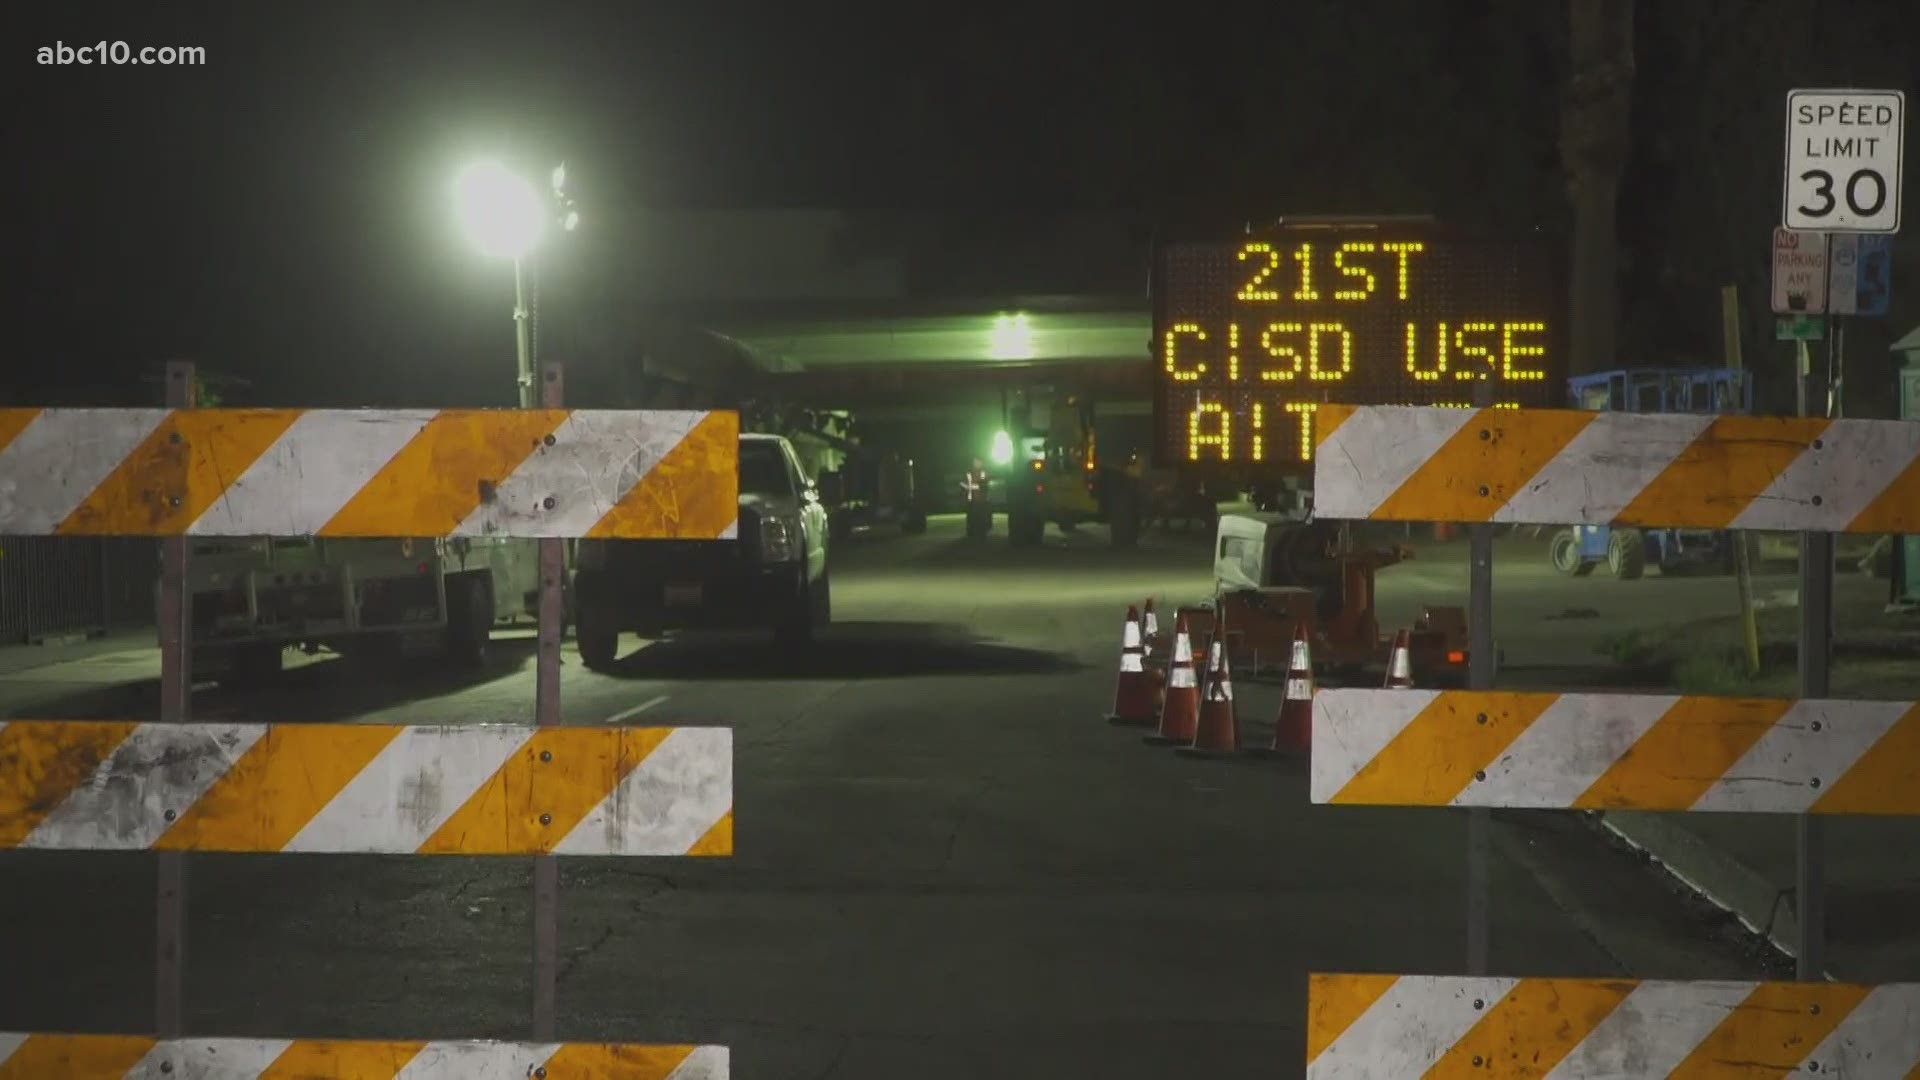 All lanes of Highway 99 have reopened after a multi-day closure by Caltrans to replace a bridge in just 99 hours.